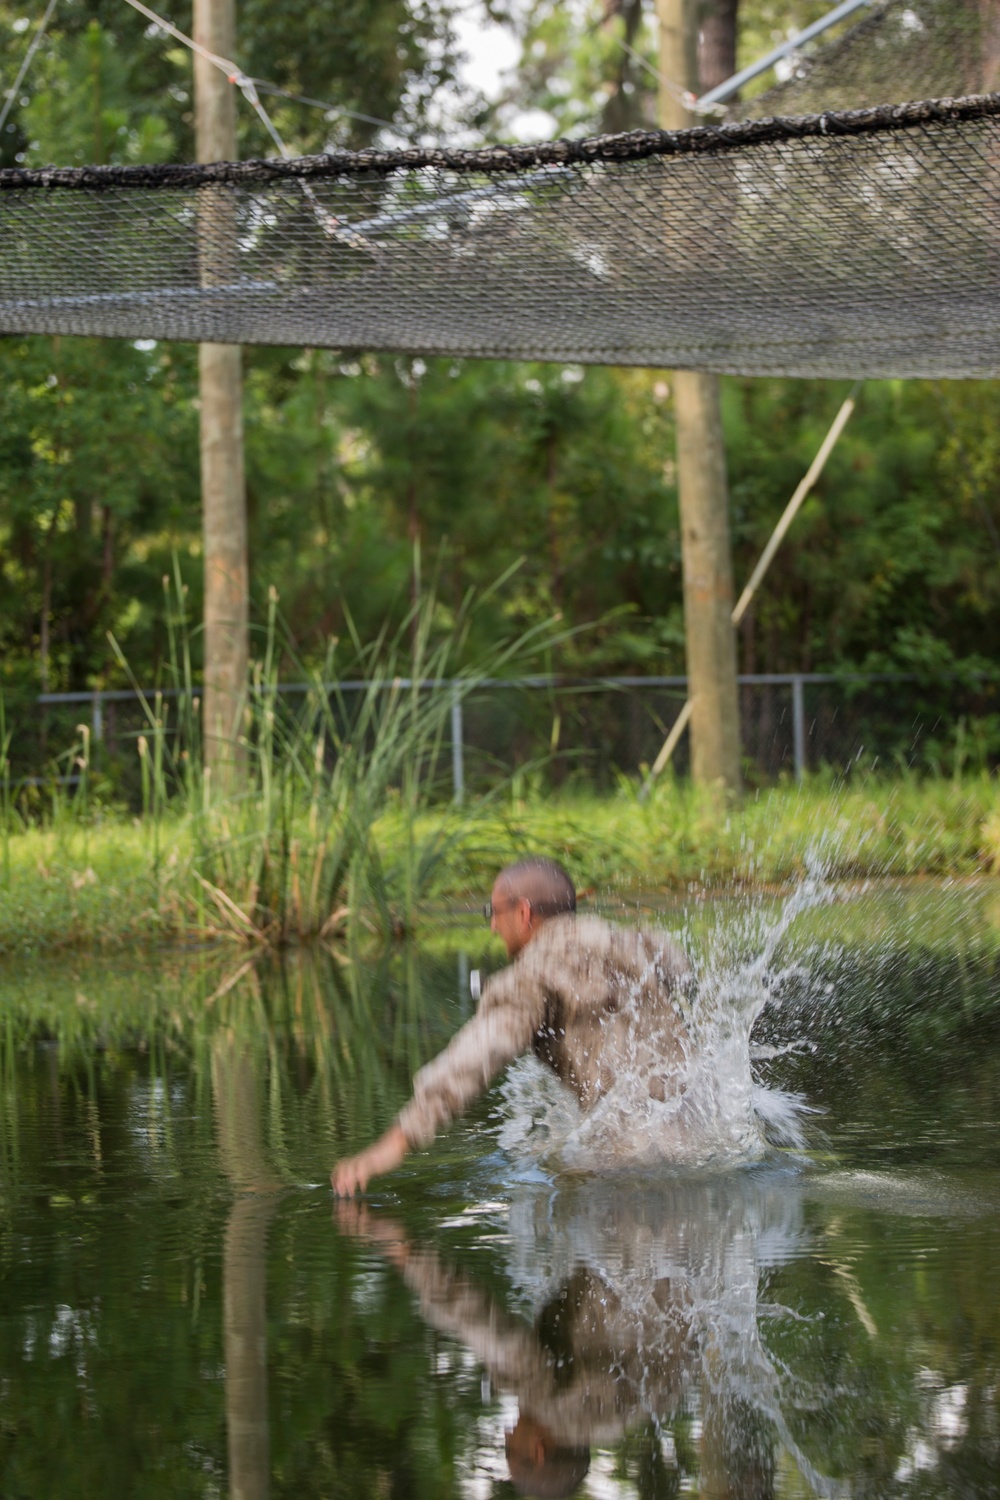 Marine recruits overcome fears on Parris Island Confidence Course